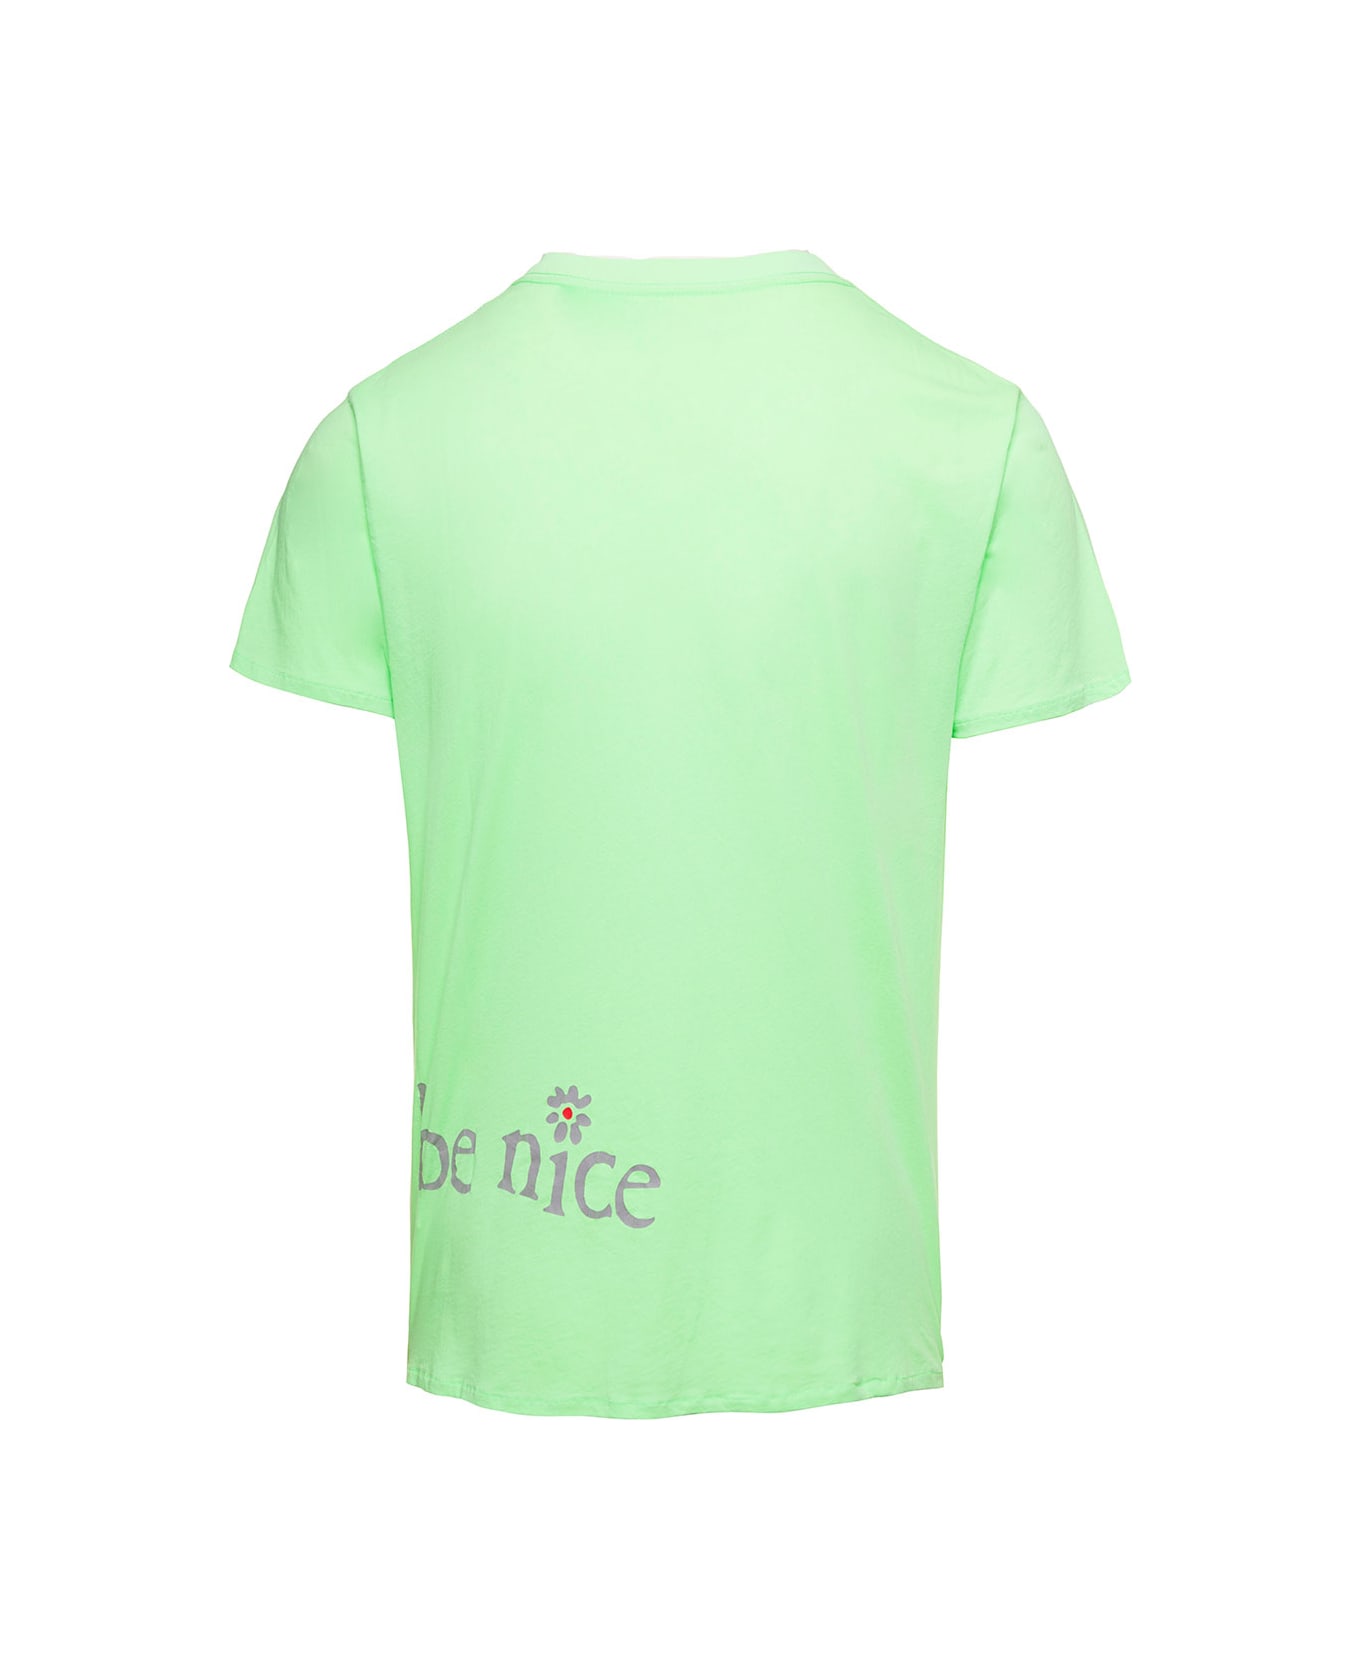 ERL Green Crewneck T-shirt With Venice Print In Cotton - Green